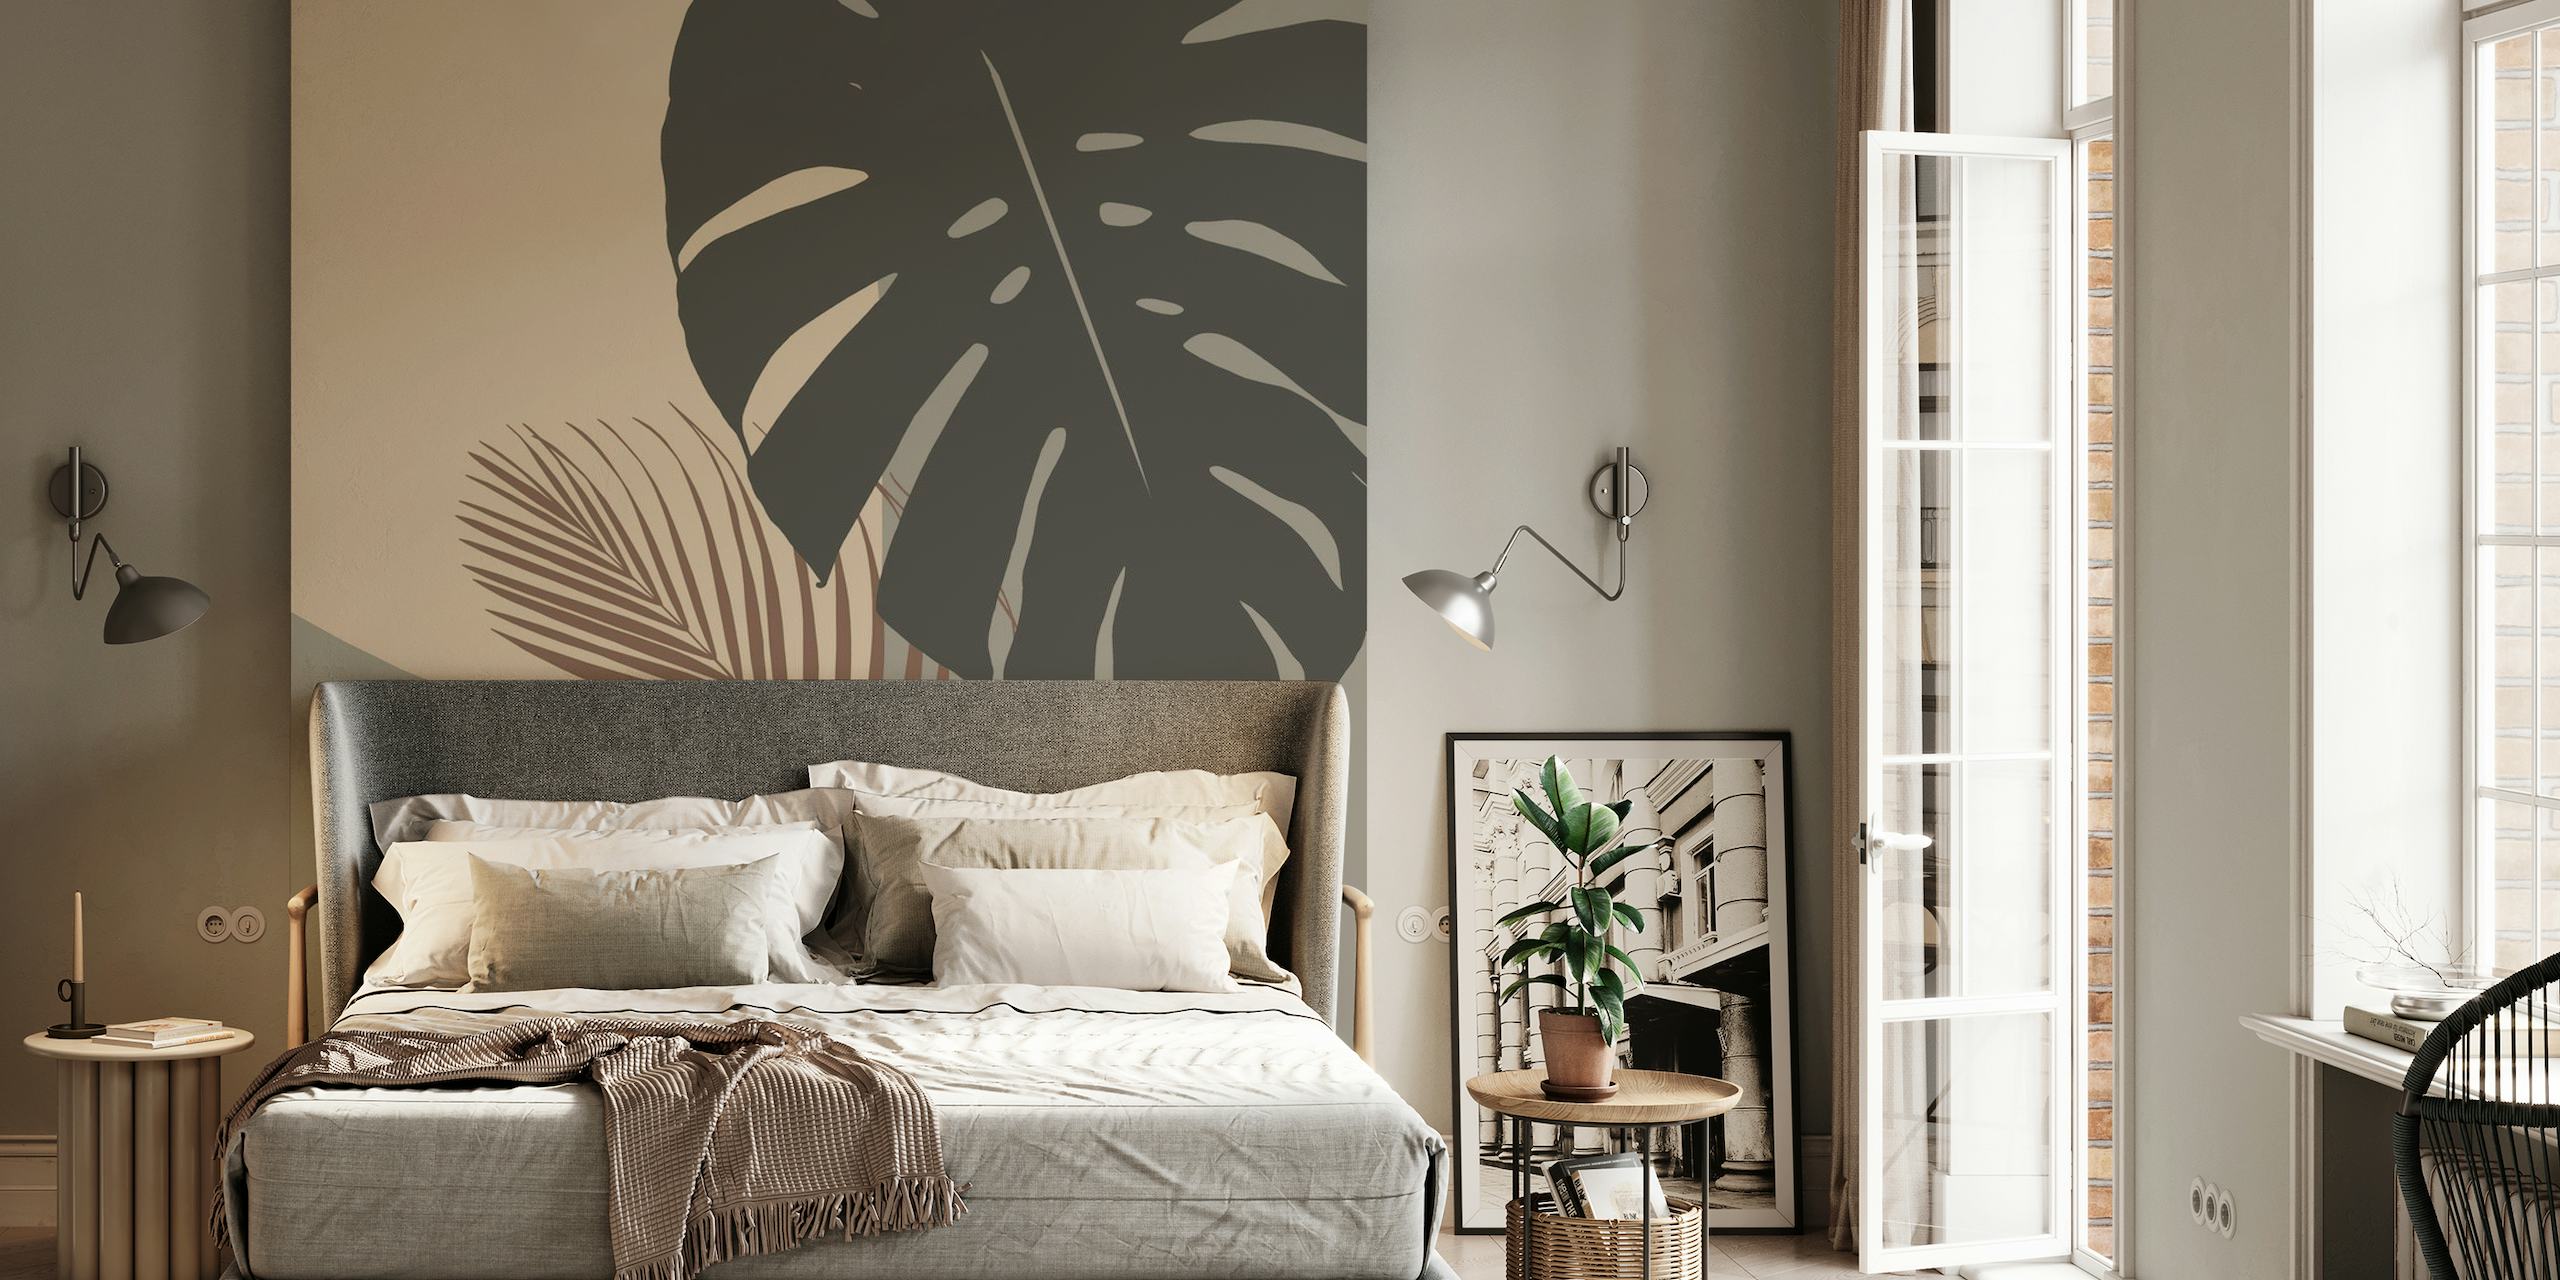 Minimalist monstera and palm leaf design wall mural in muted tones